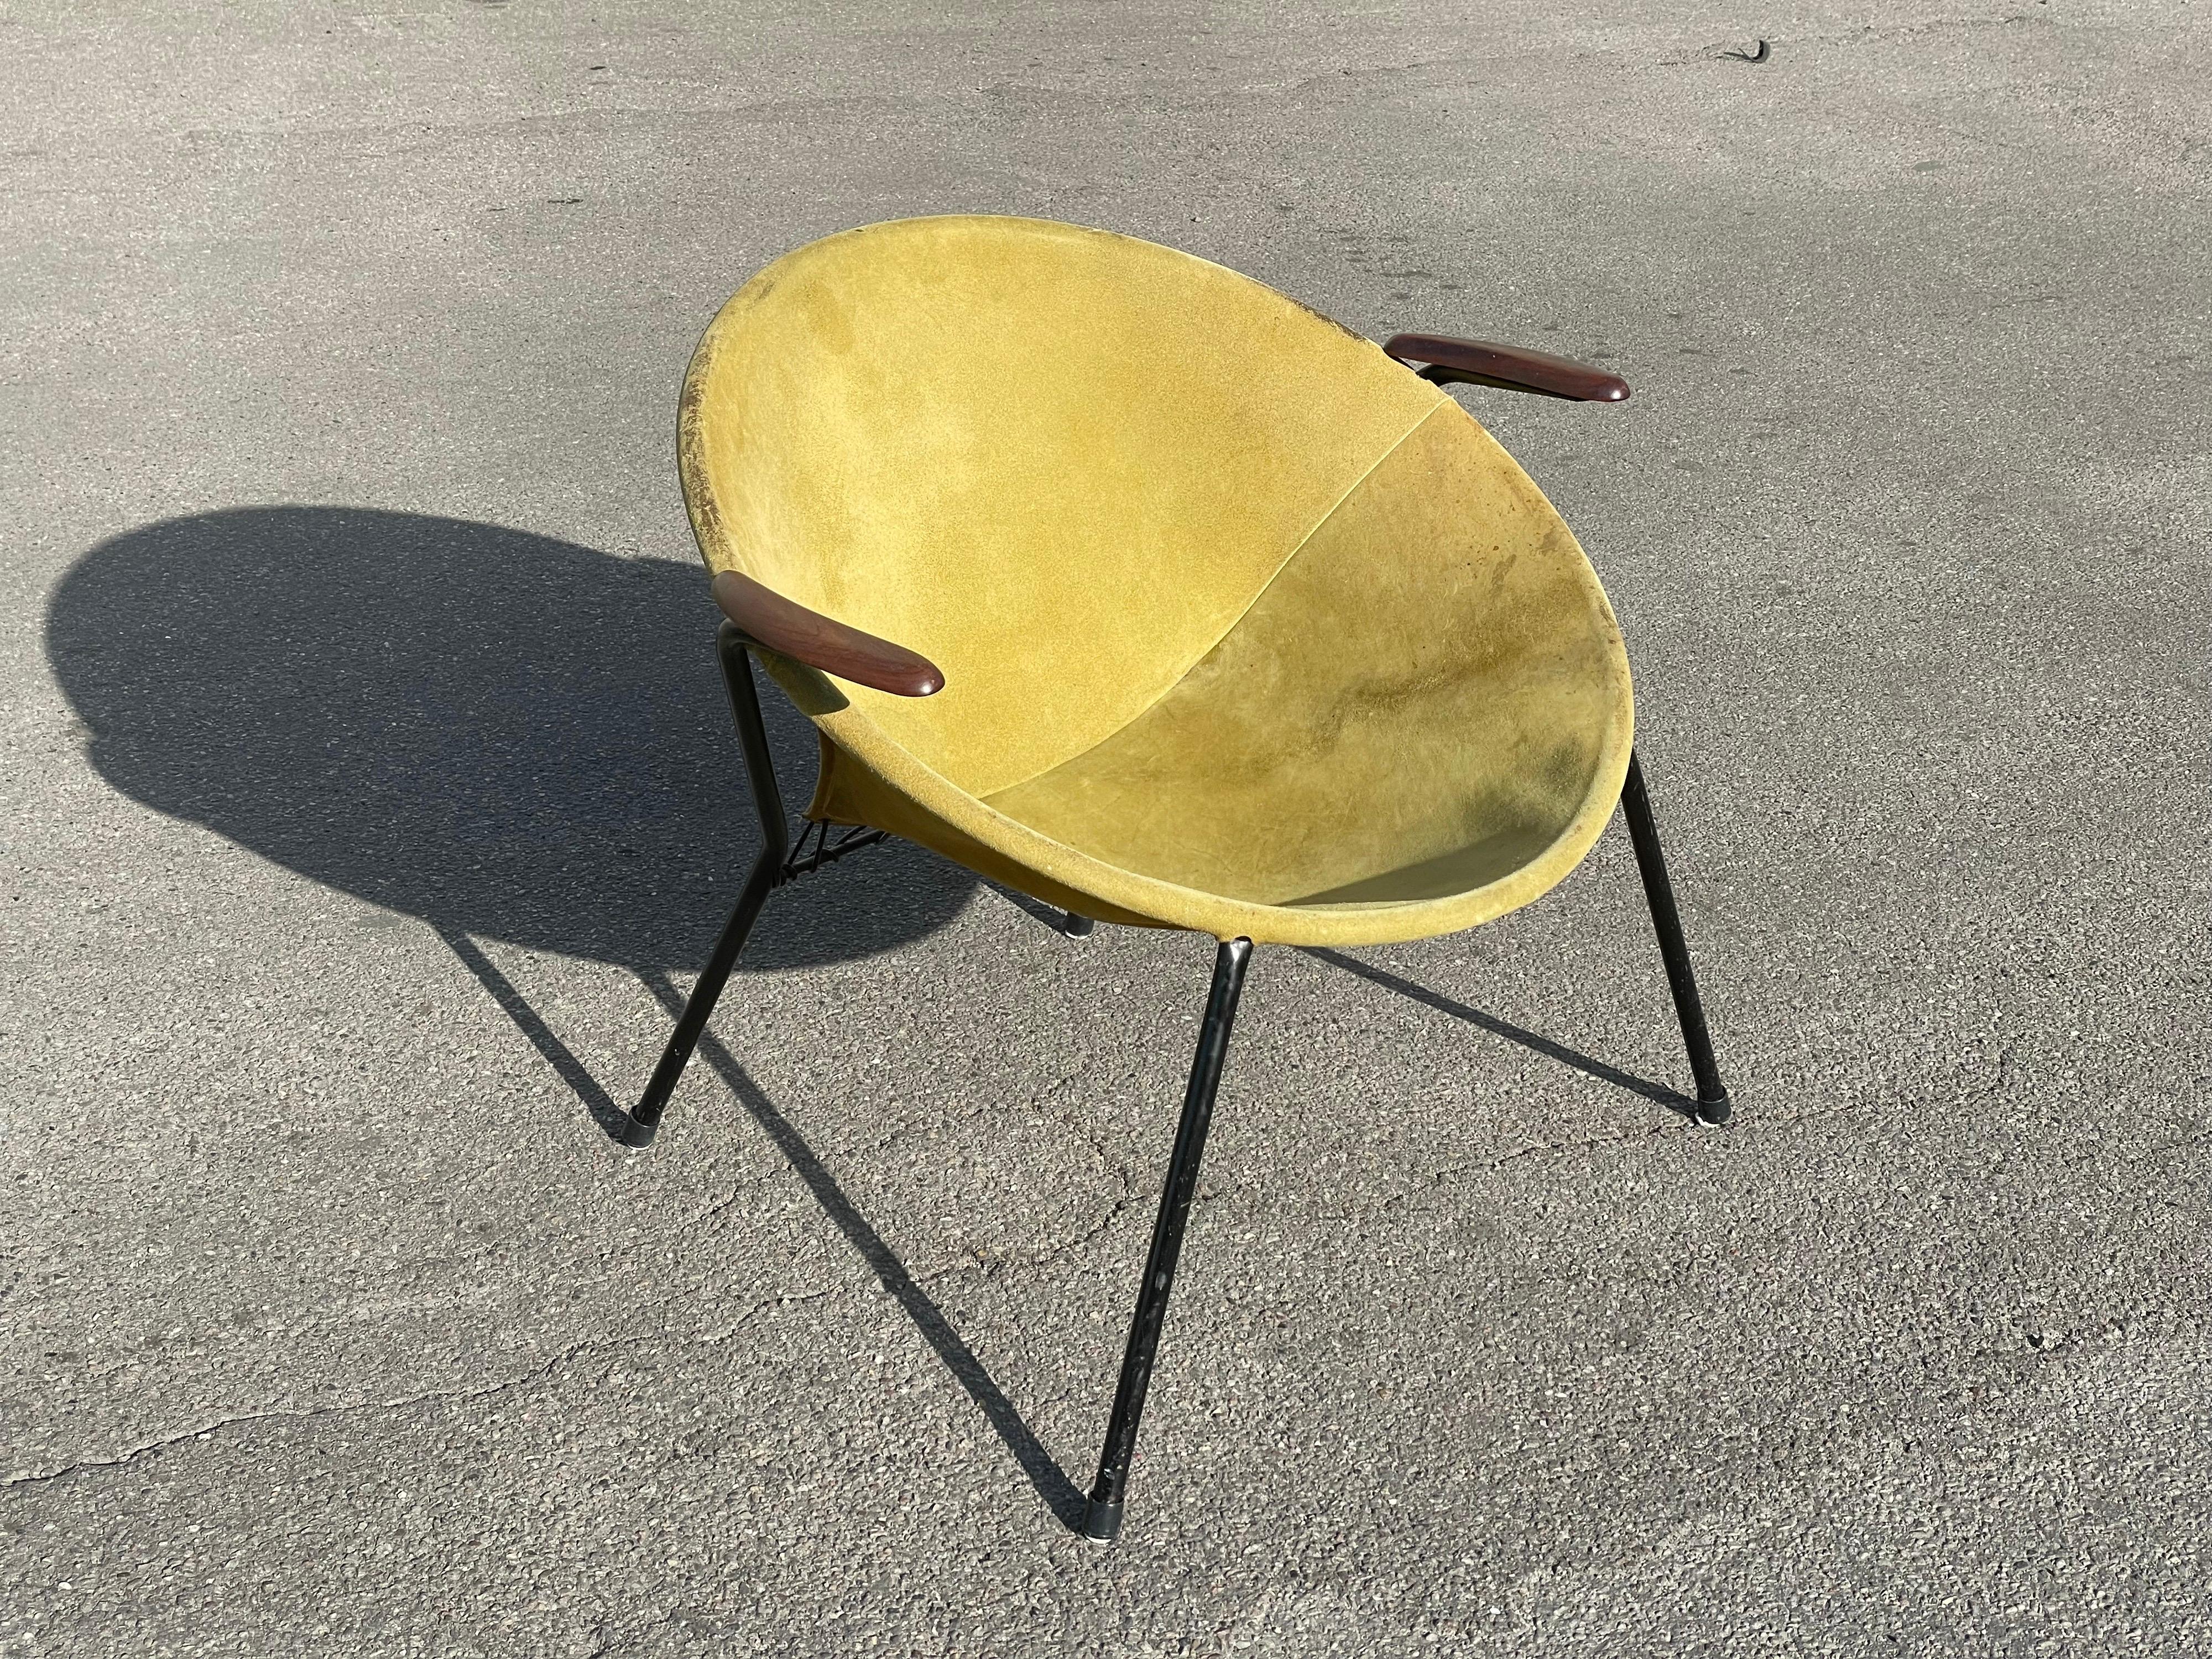 The iconic balloon lounge chair by highly acclaimed Danish architect, Hans Olsen, who designed the chair in the 1950s. With teak armrests and a light metal frame. The lounge chair does not take up much space, it is lovely to sit in and it will add a